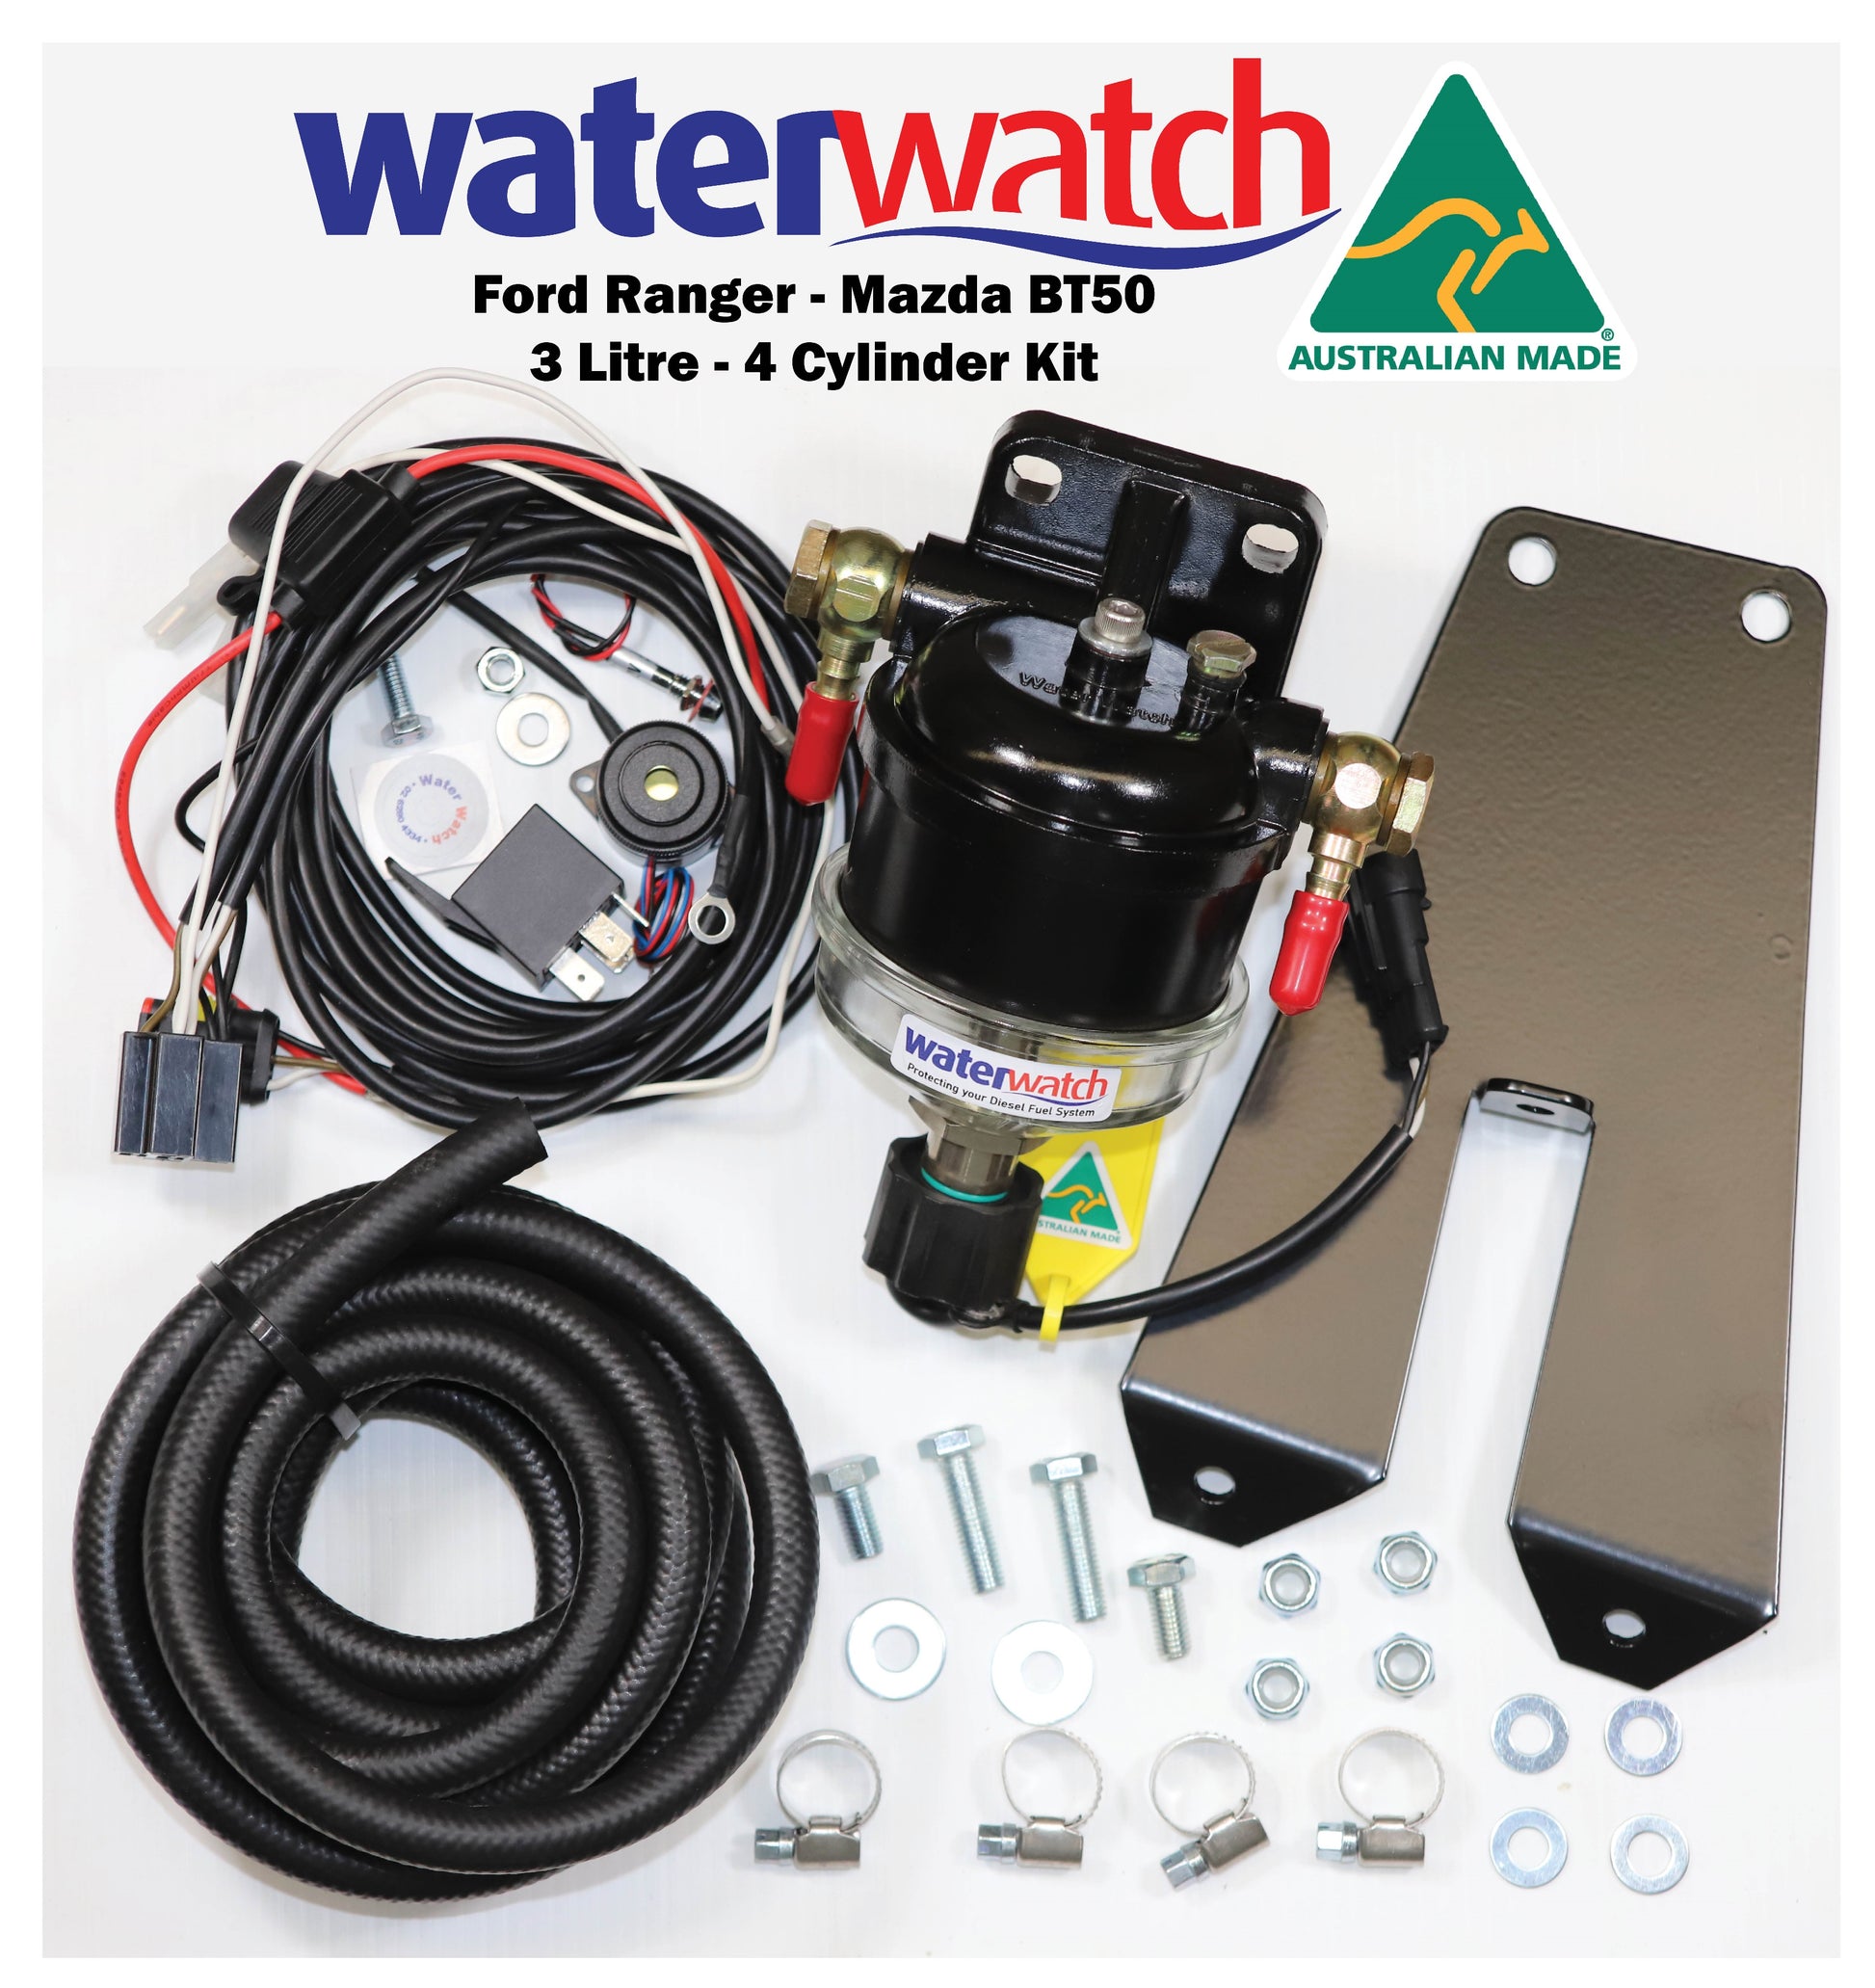 WATER WATCH for Mazda BT50 (4cyl) - Protection against Diesel Fuel Contamination Damage - Specialist Tools Australia